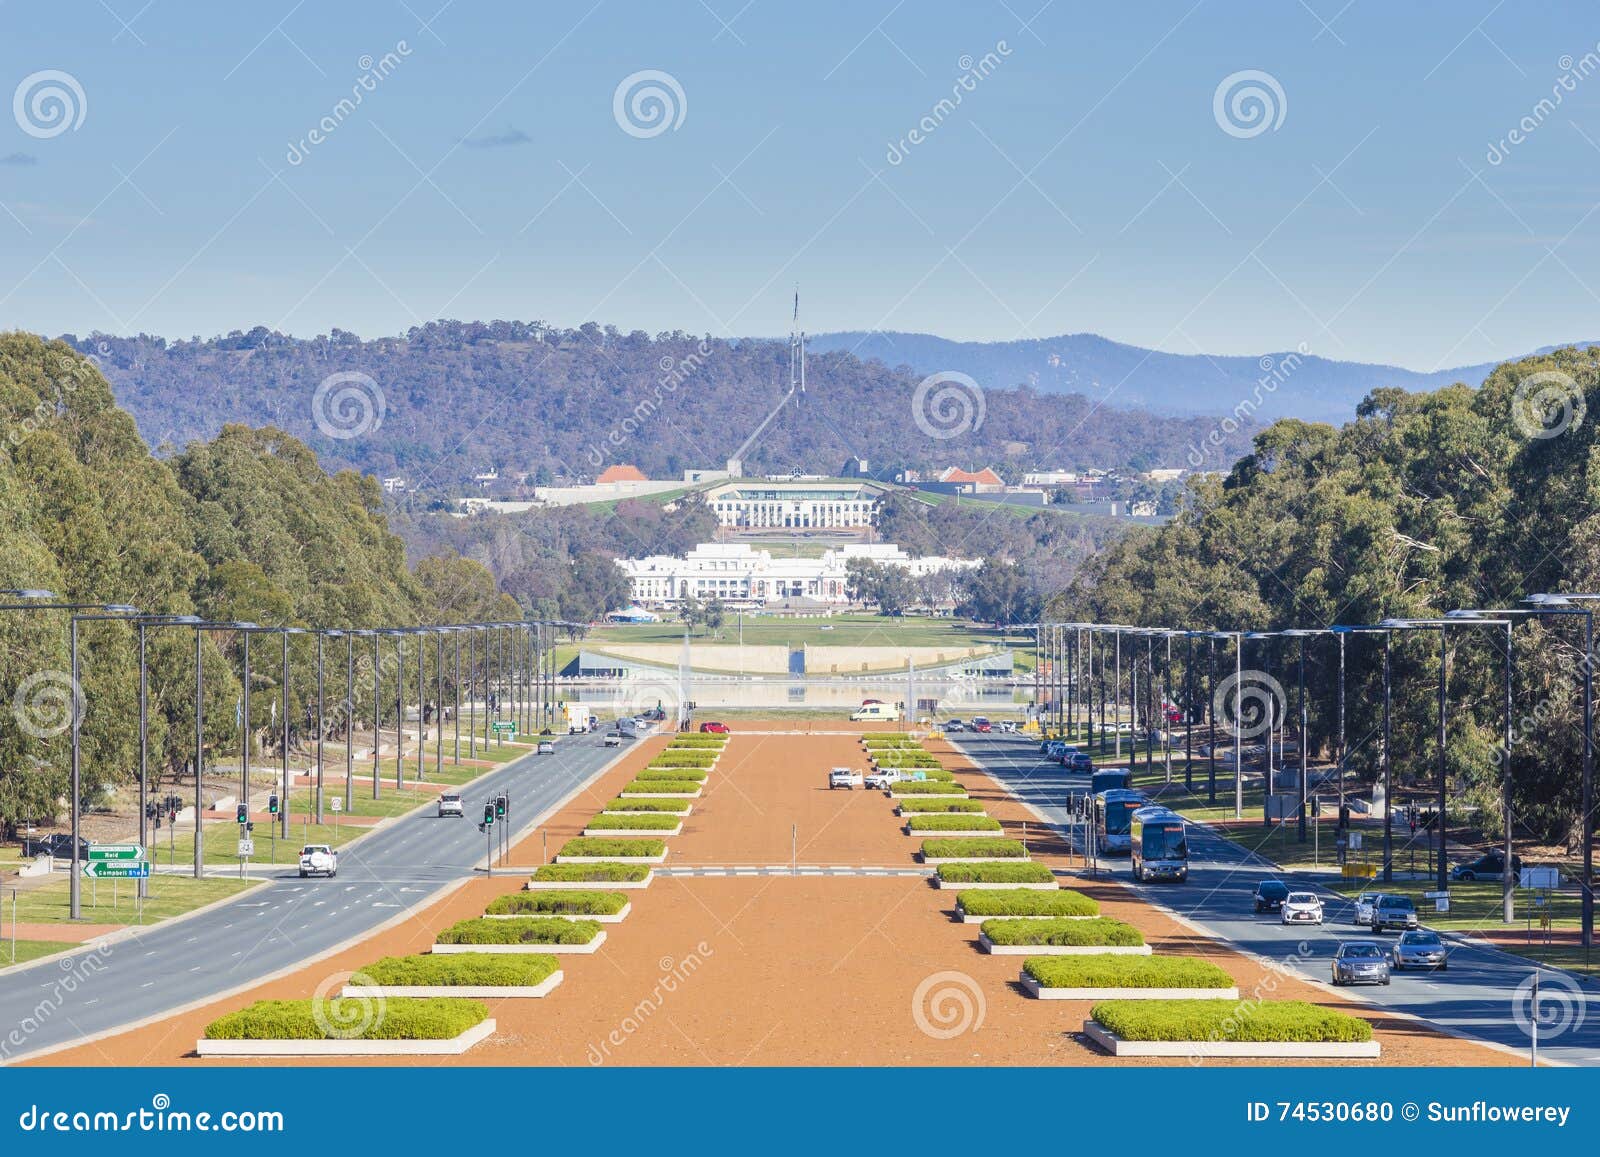 australian parliament house clipart with trees